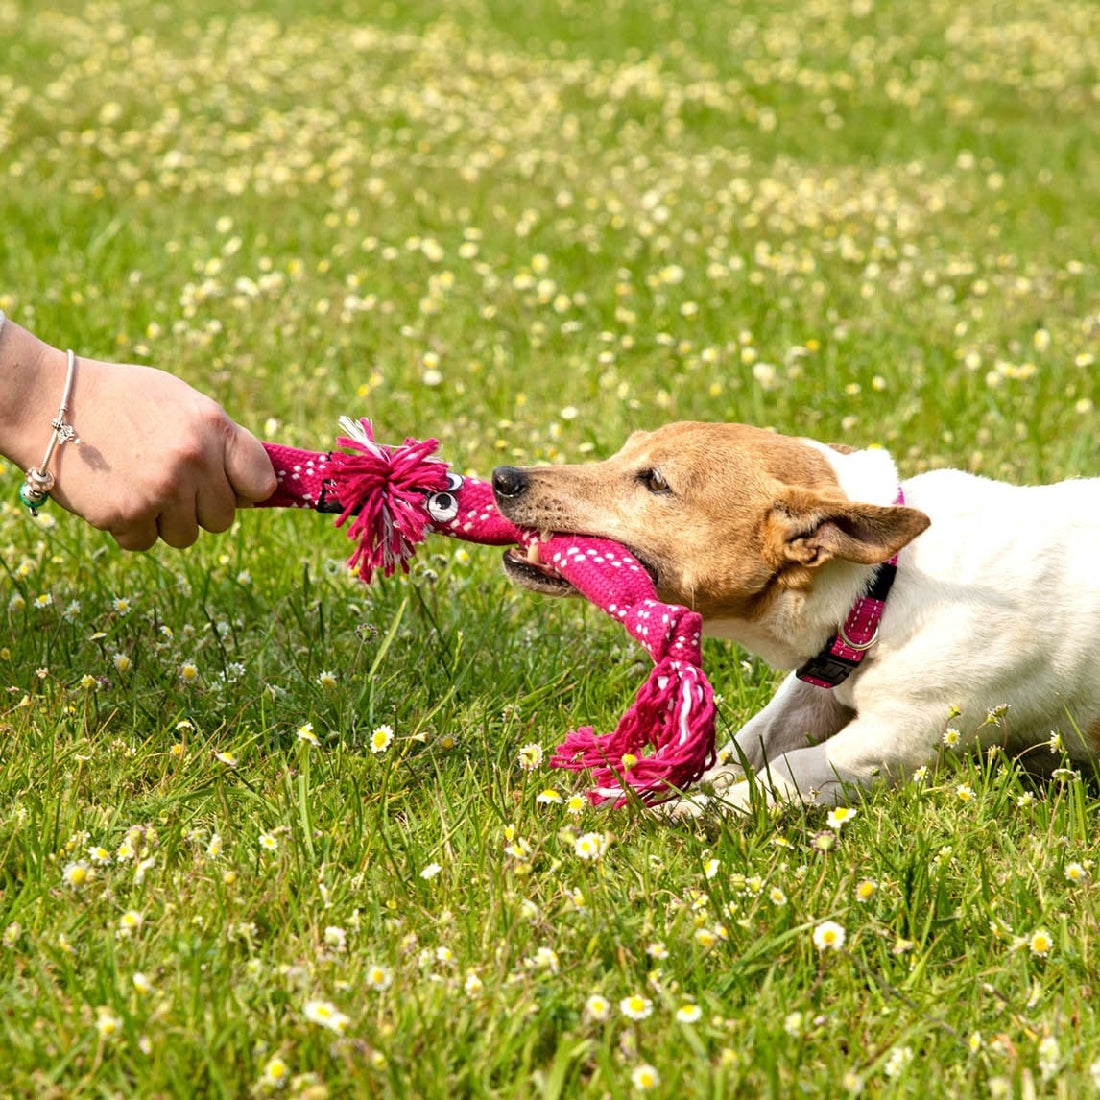 Dog playing tug-of-war with Rogz toy on grass.